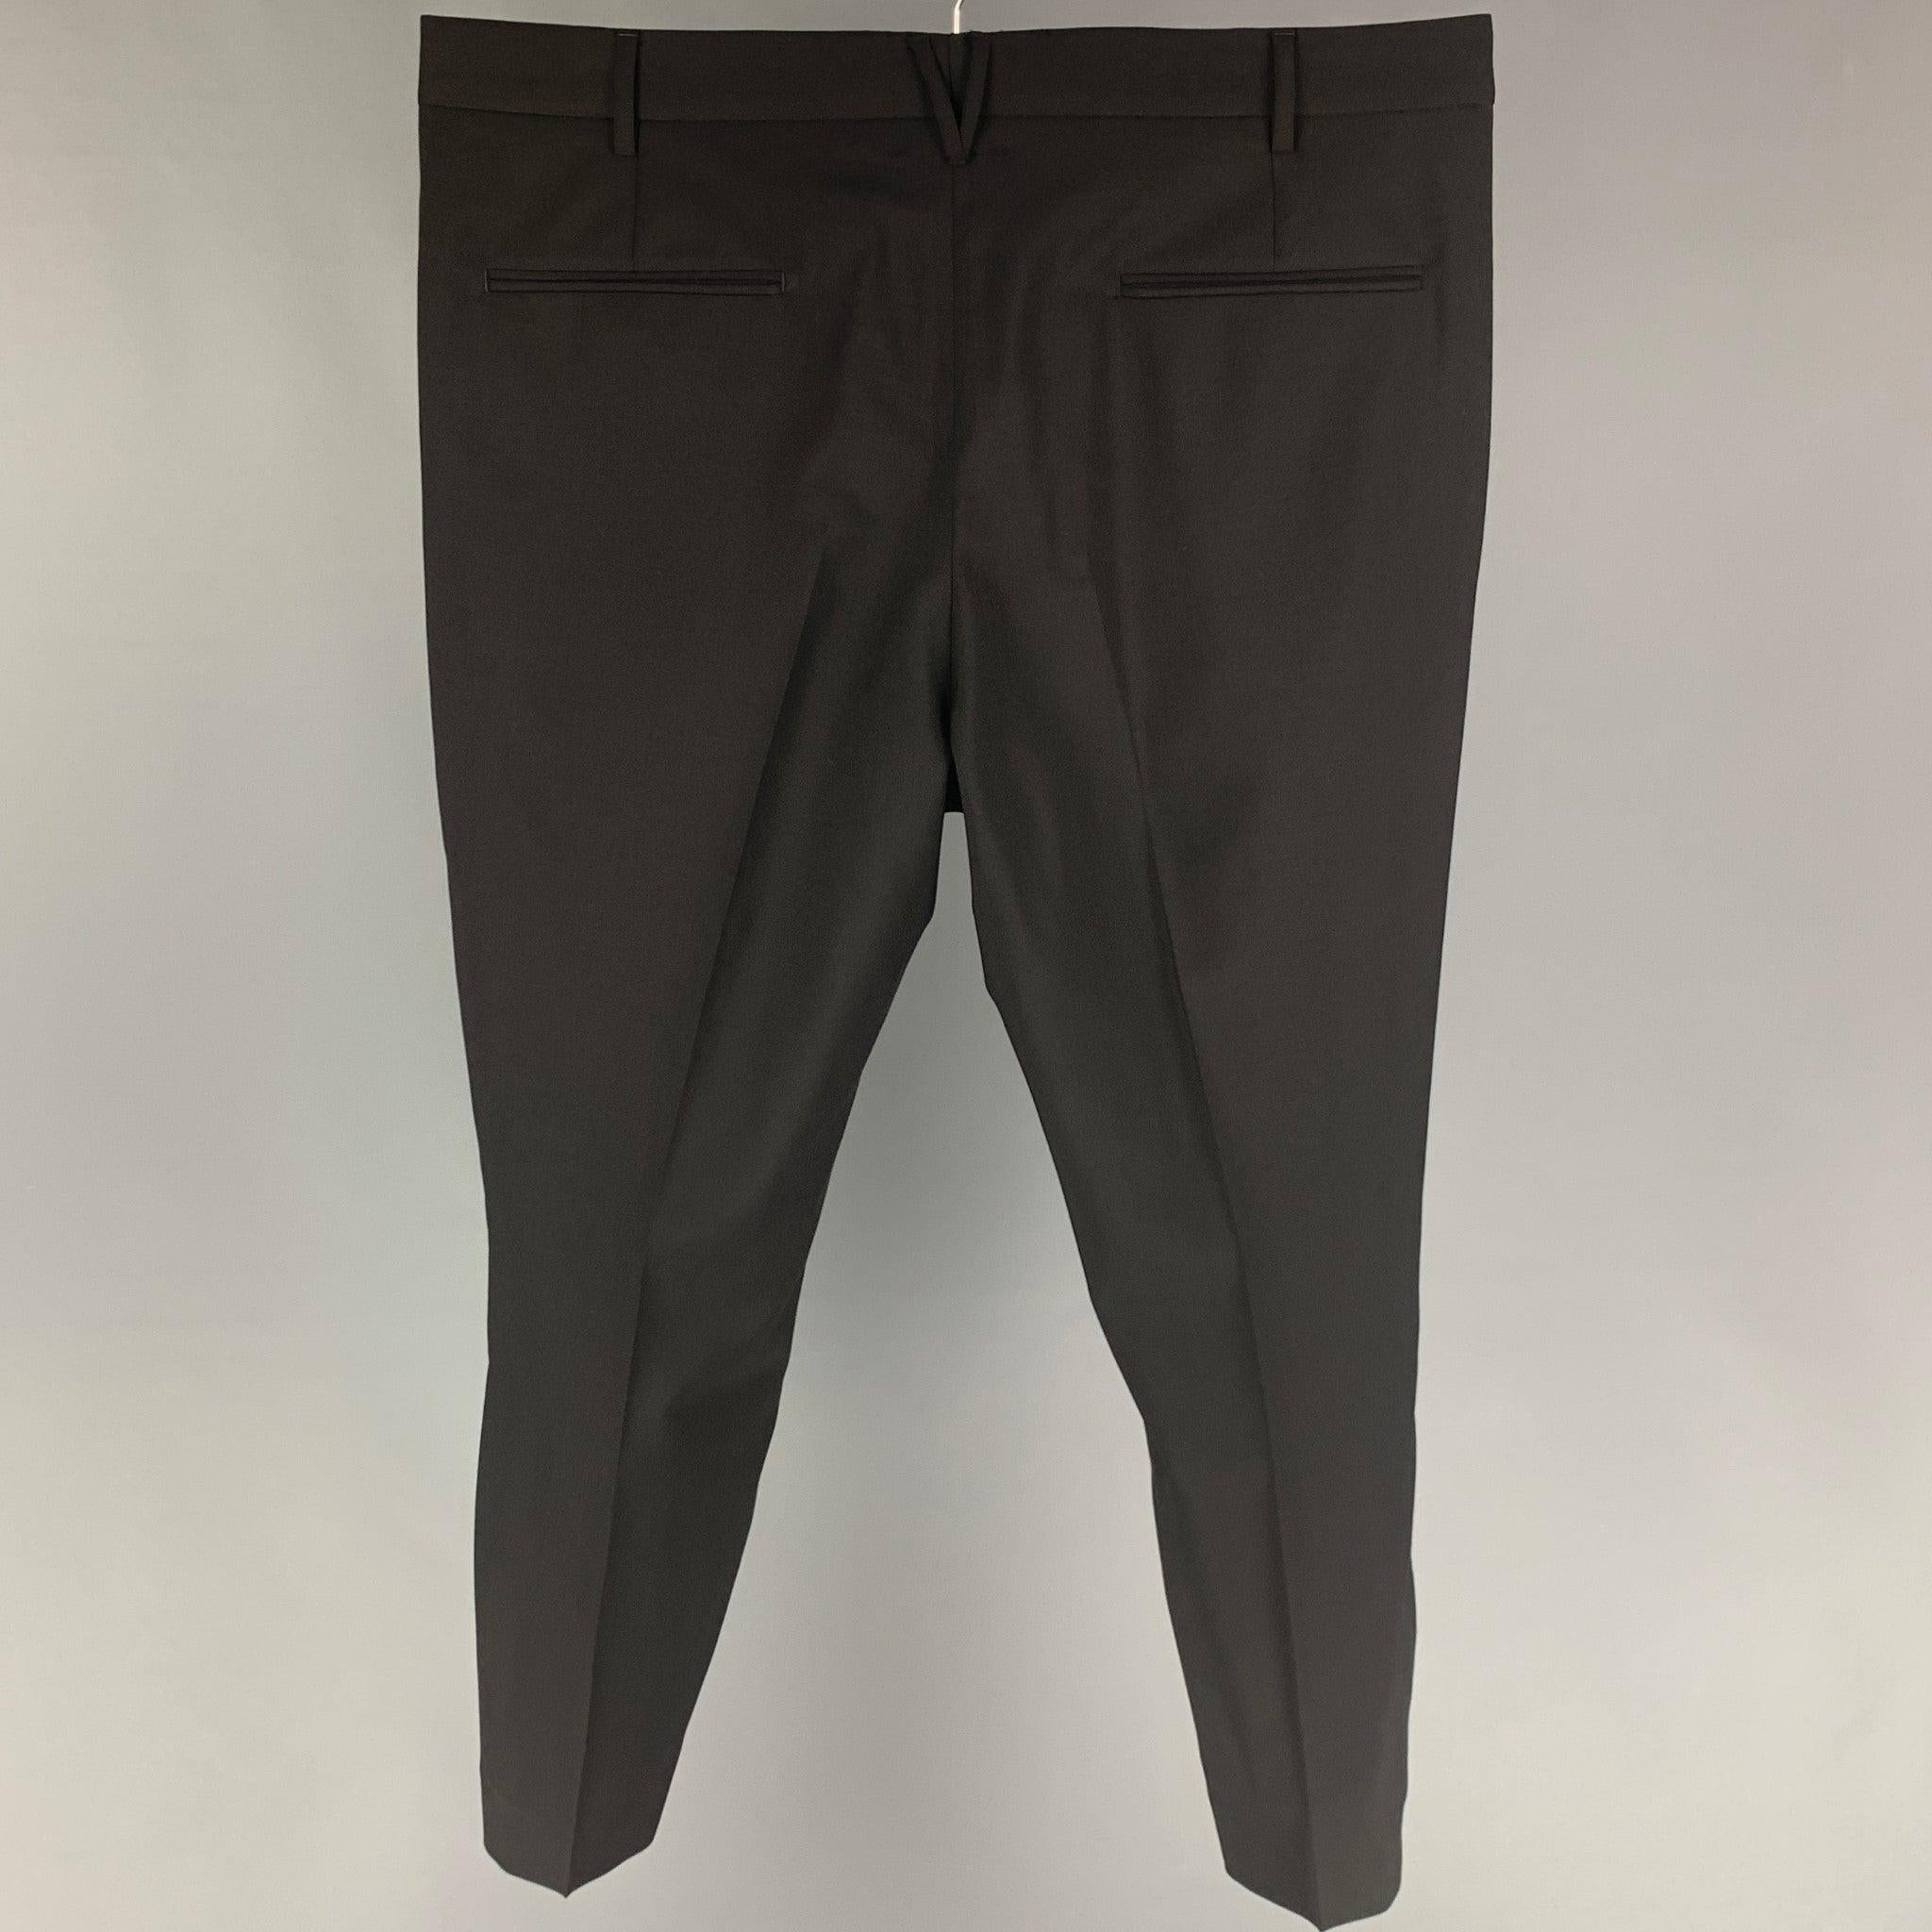 VALENTINO dress pants comes in a black wool / mohair featuring a flat front, front tab, and a zip fly closure. Made in Italy.
Very Good
Pre-Owned Condition. 

Marked:   50 

Measurements: 
  Waist: 36 inches  Rise: 11 inches  Inseam: 26 inches 
  
 